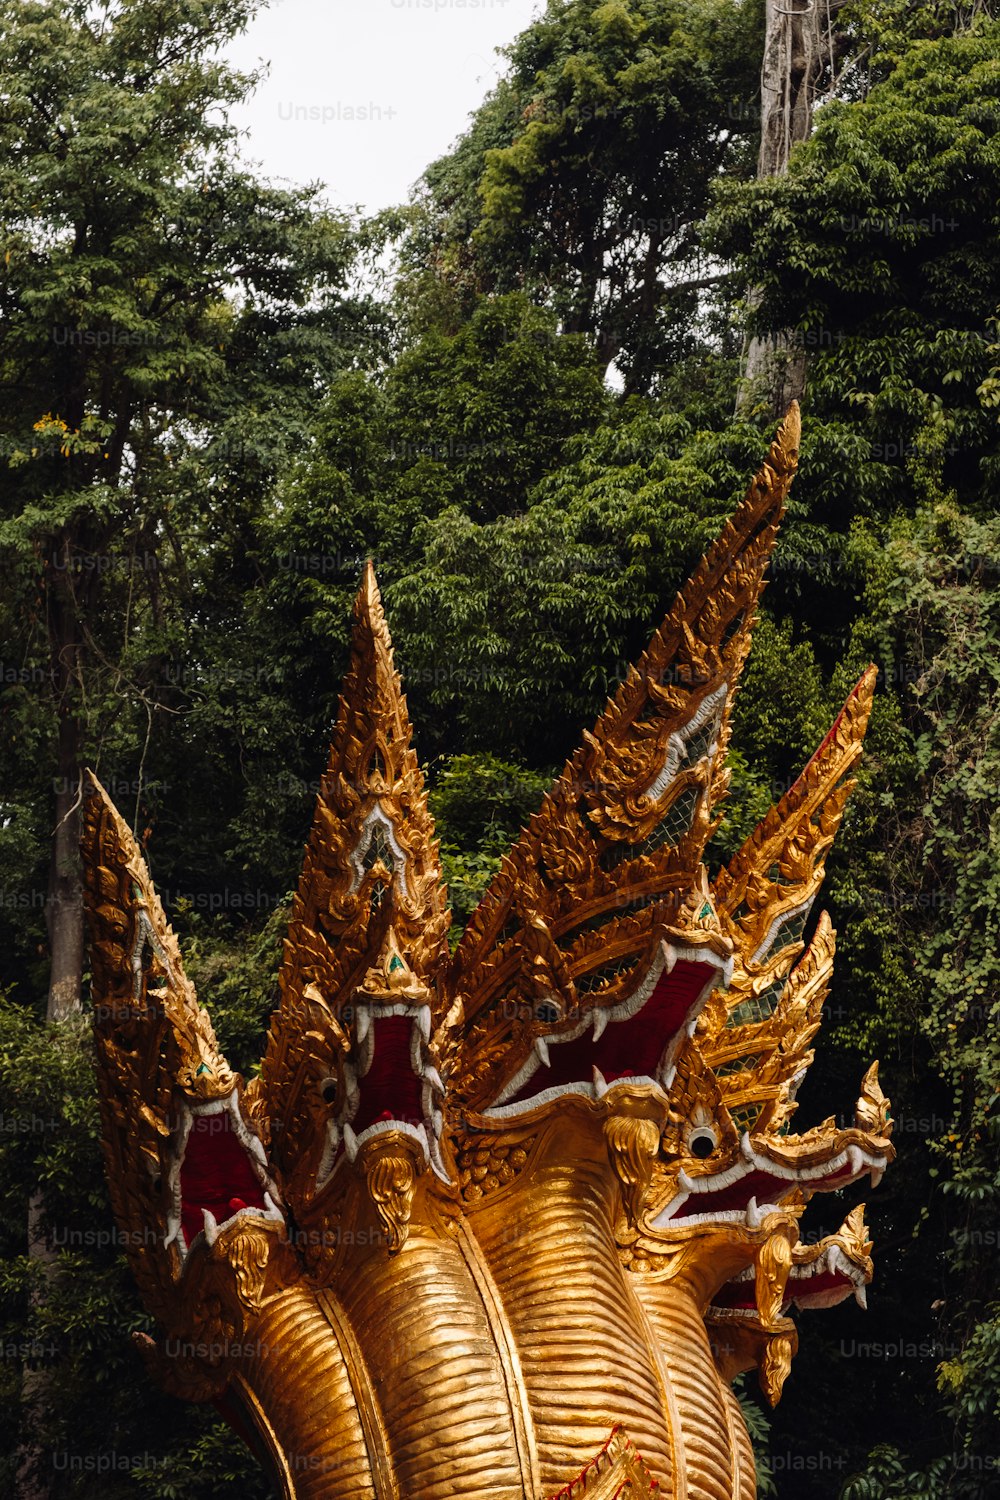 a large golden dragon statue in front of a forest